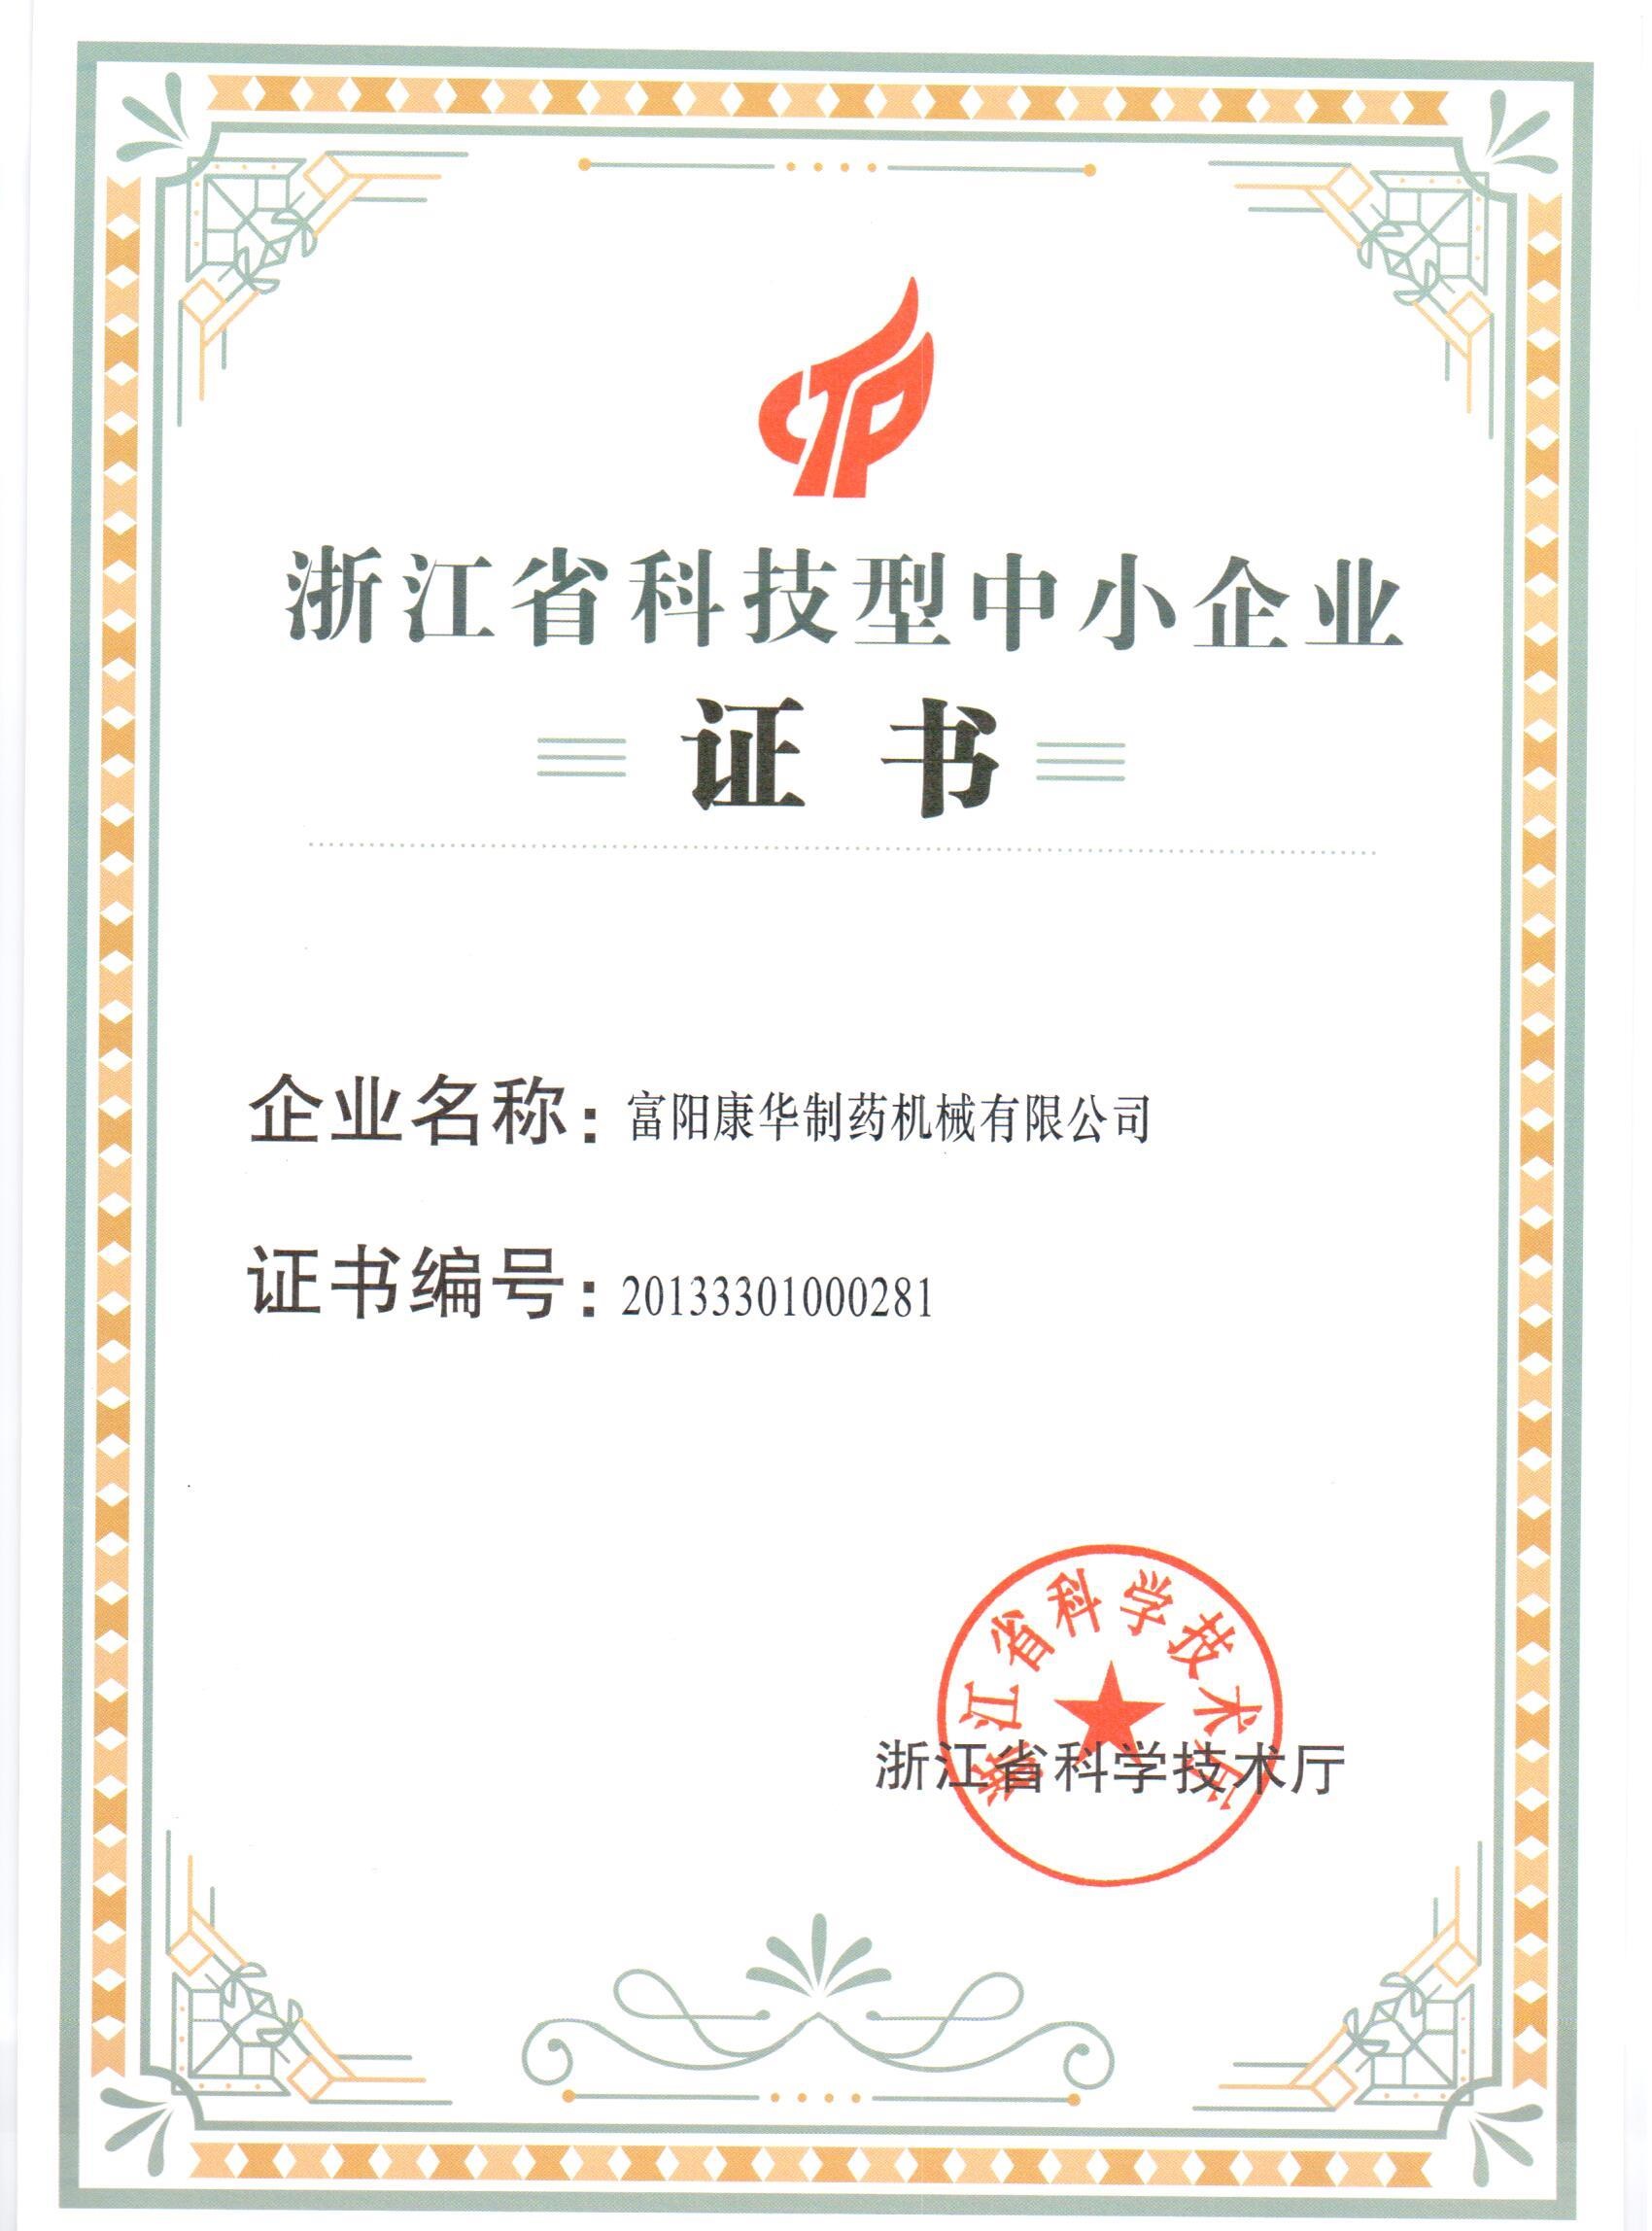 Certificate of scientific and technological enterprise